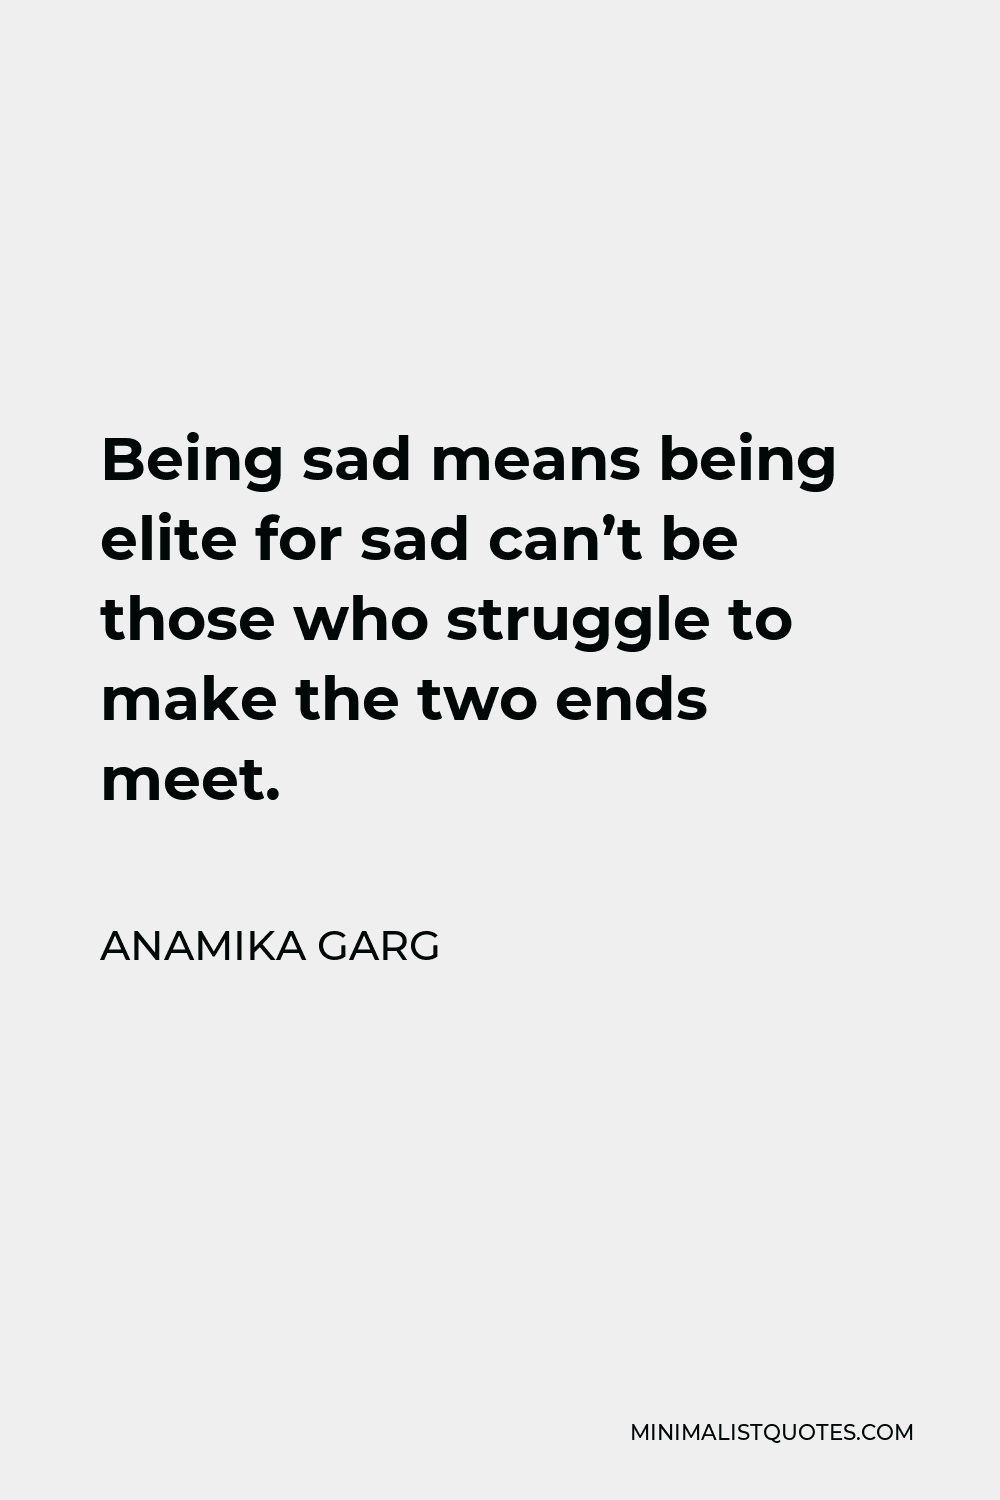 Anamika Garg Quote - Being sad means being elite for sad can’t be those who struggle to make the two ends meet.